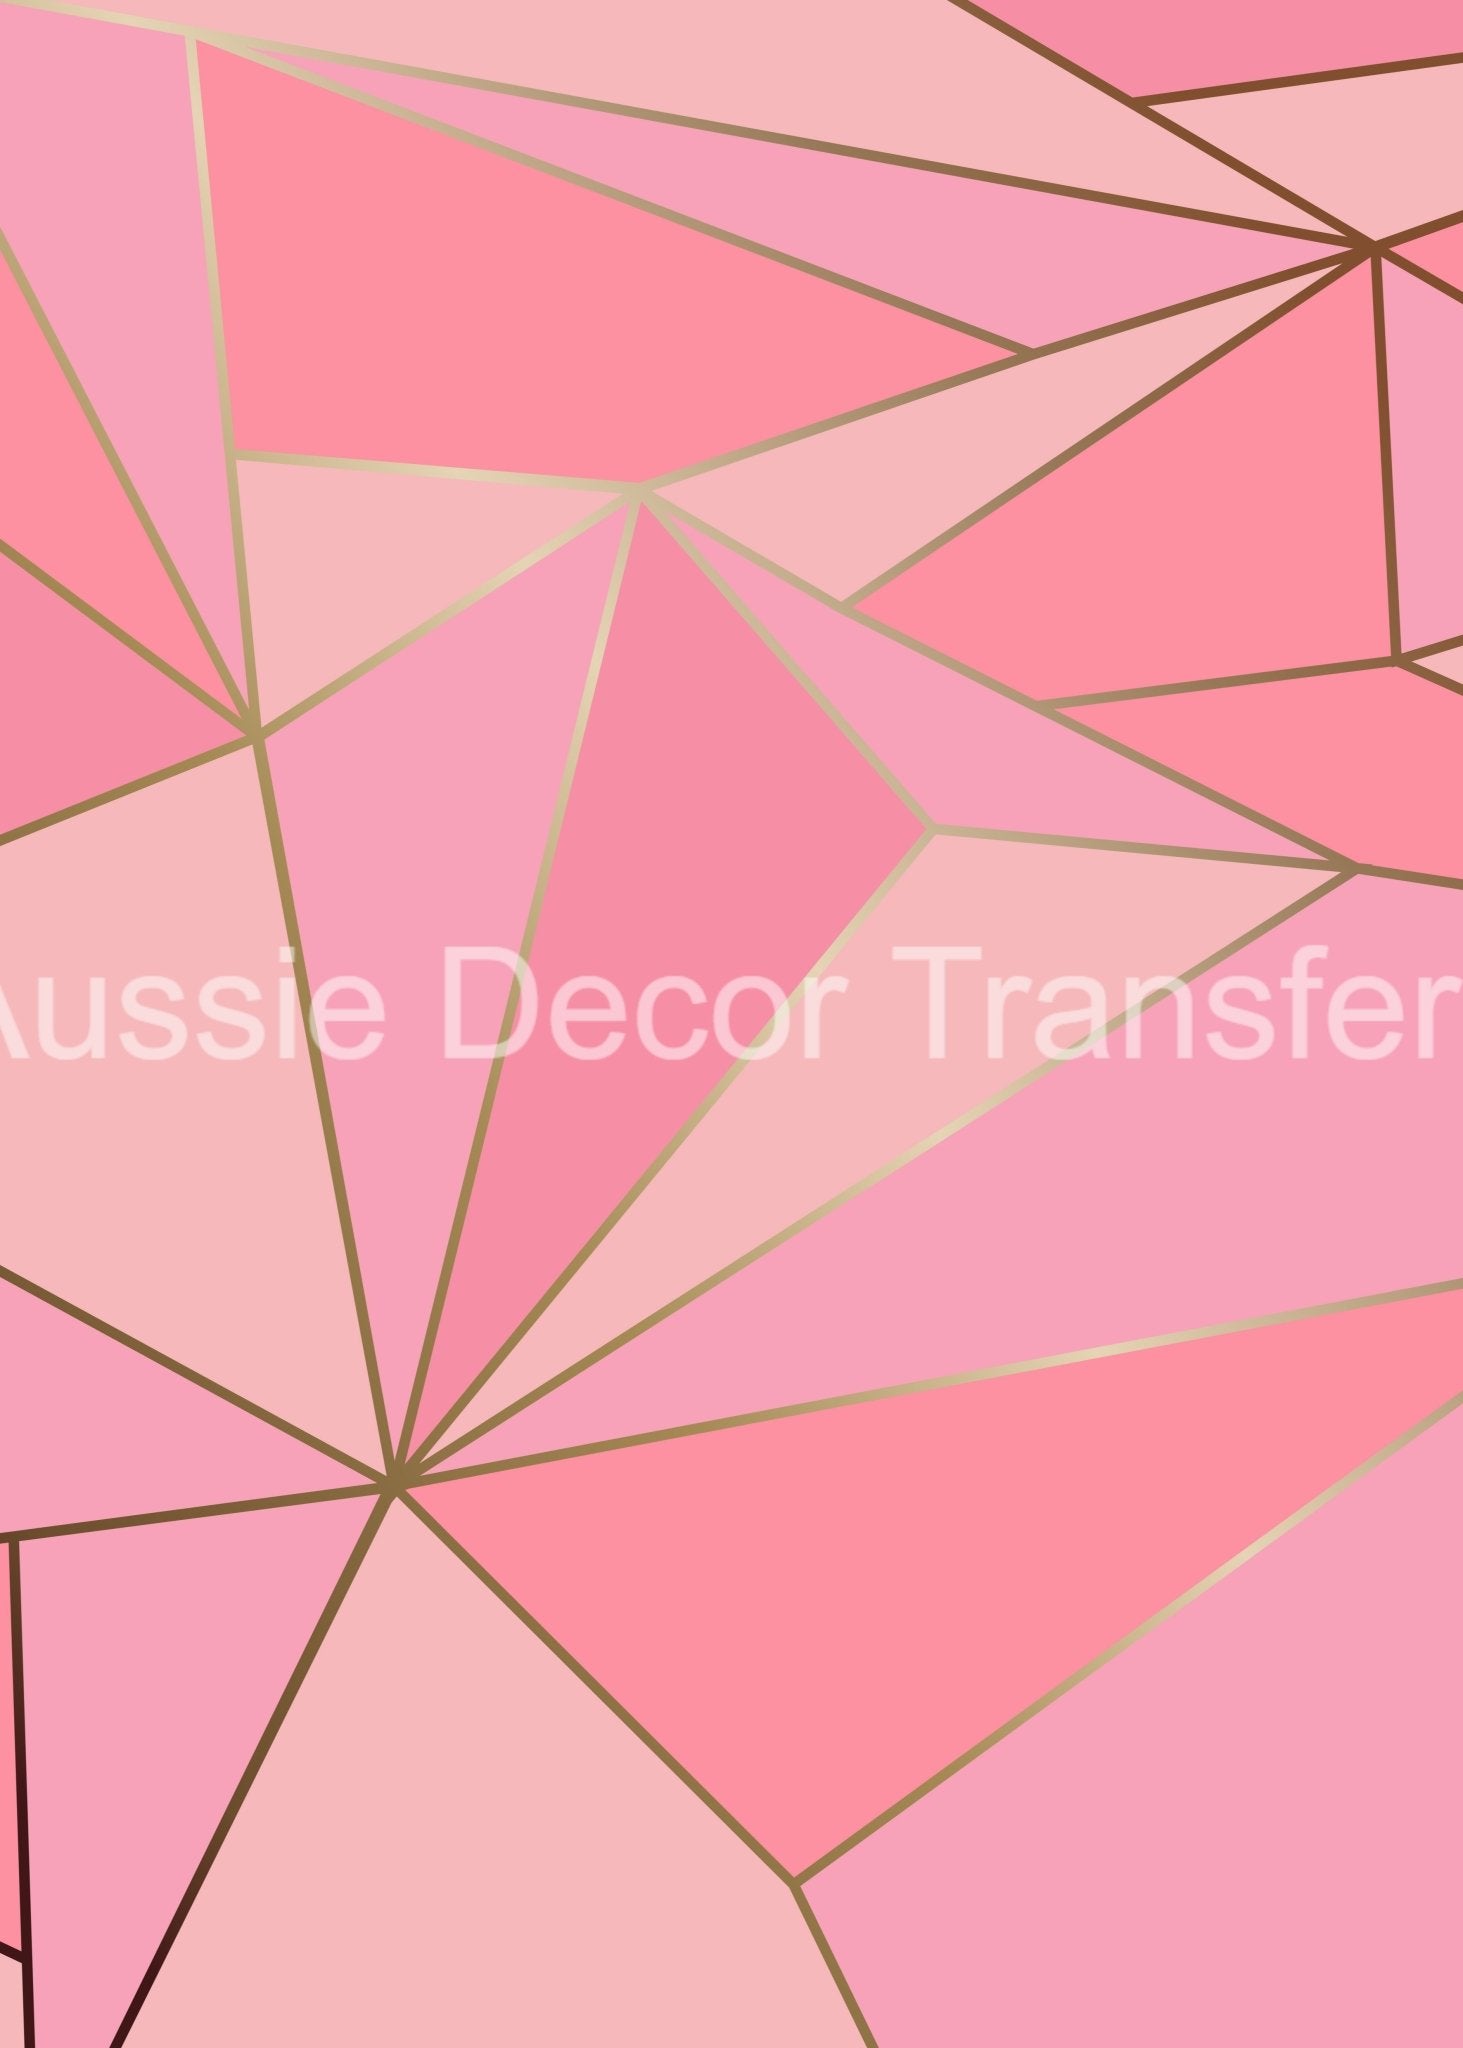 Aussie Decor Transfers Poster Print Pink & Gold Geo - Not Your Average Poster Print! - AUS ONLY